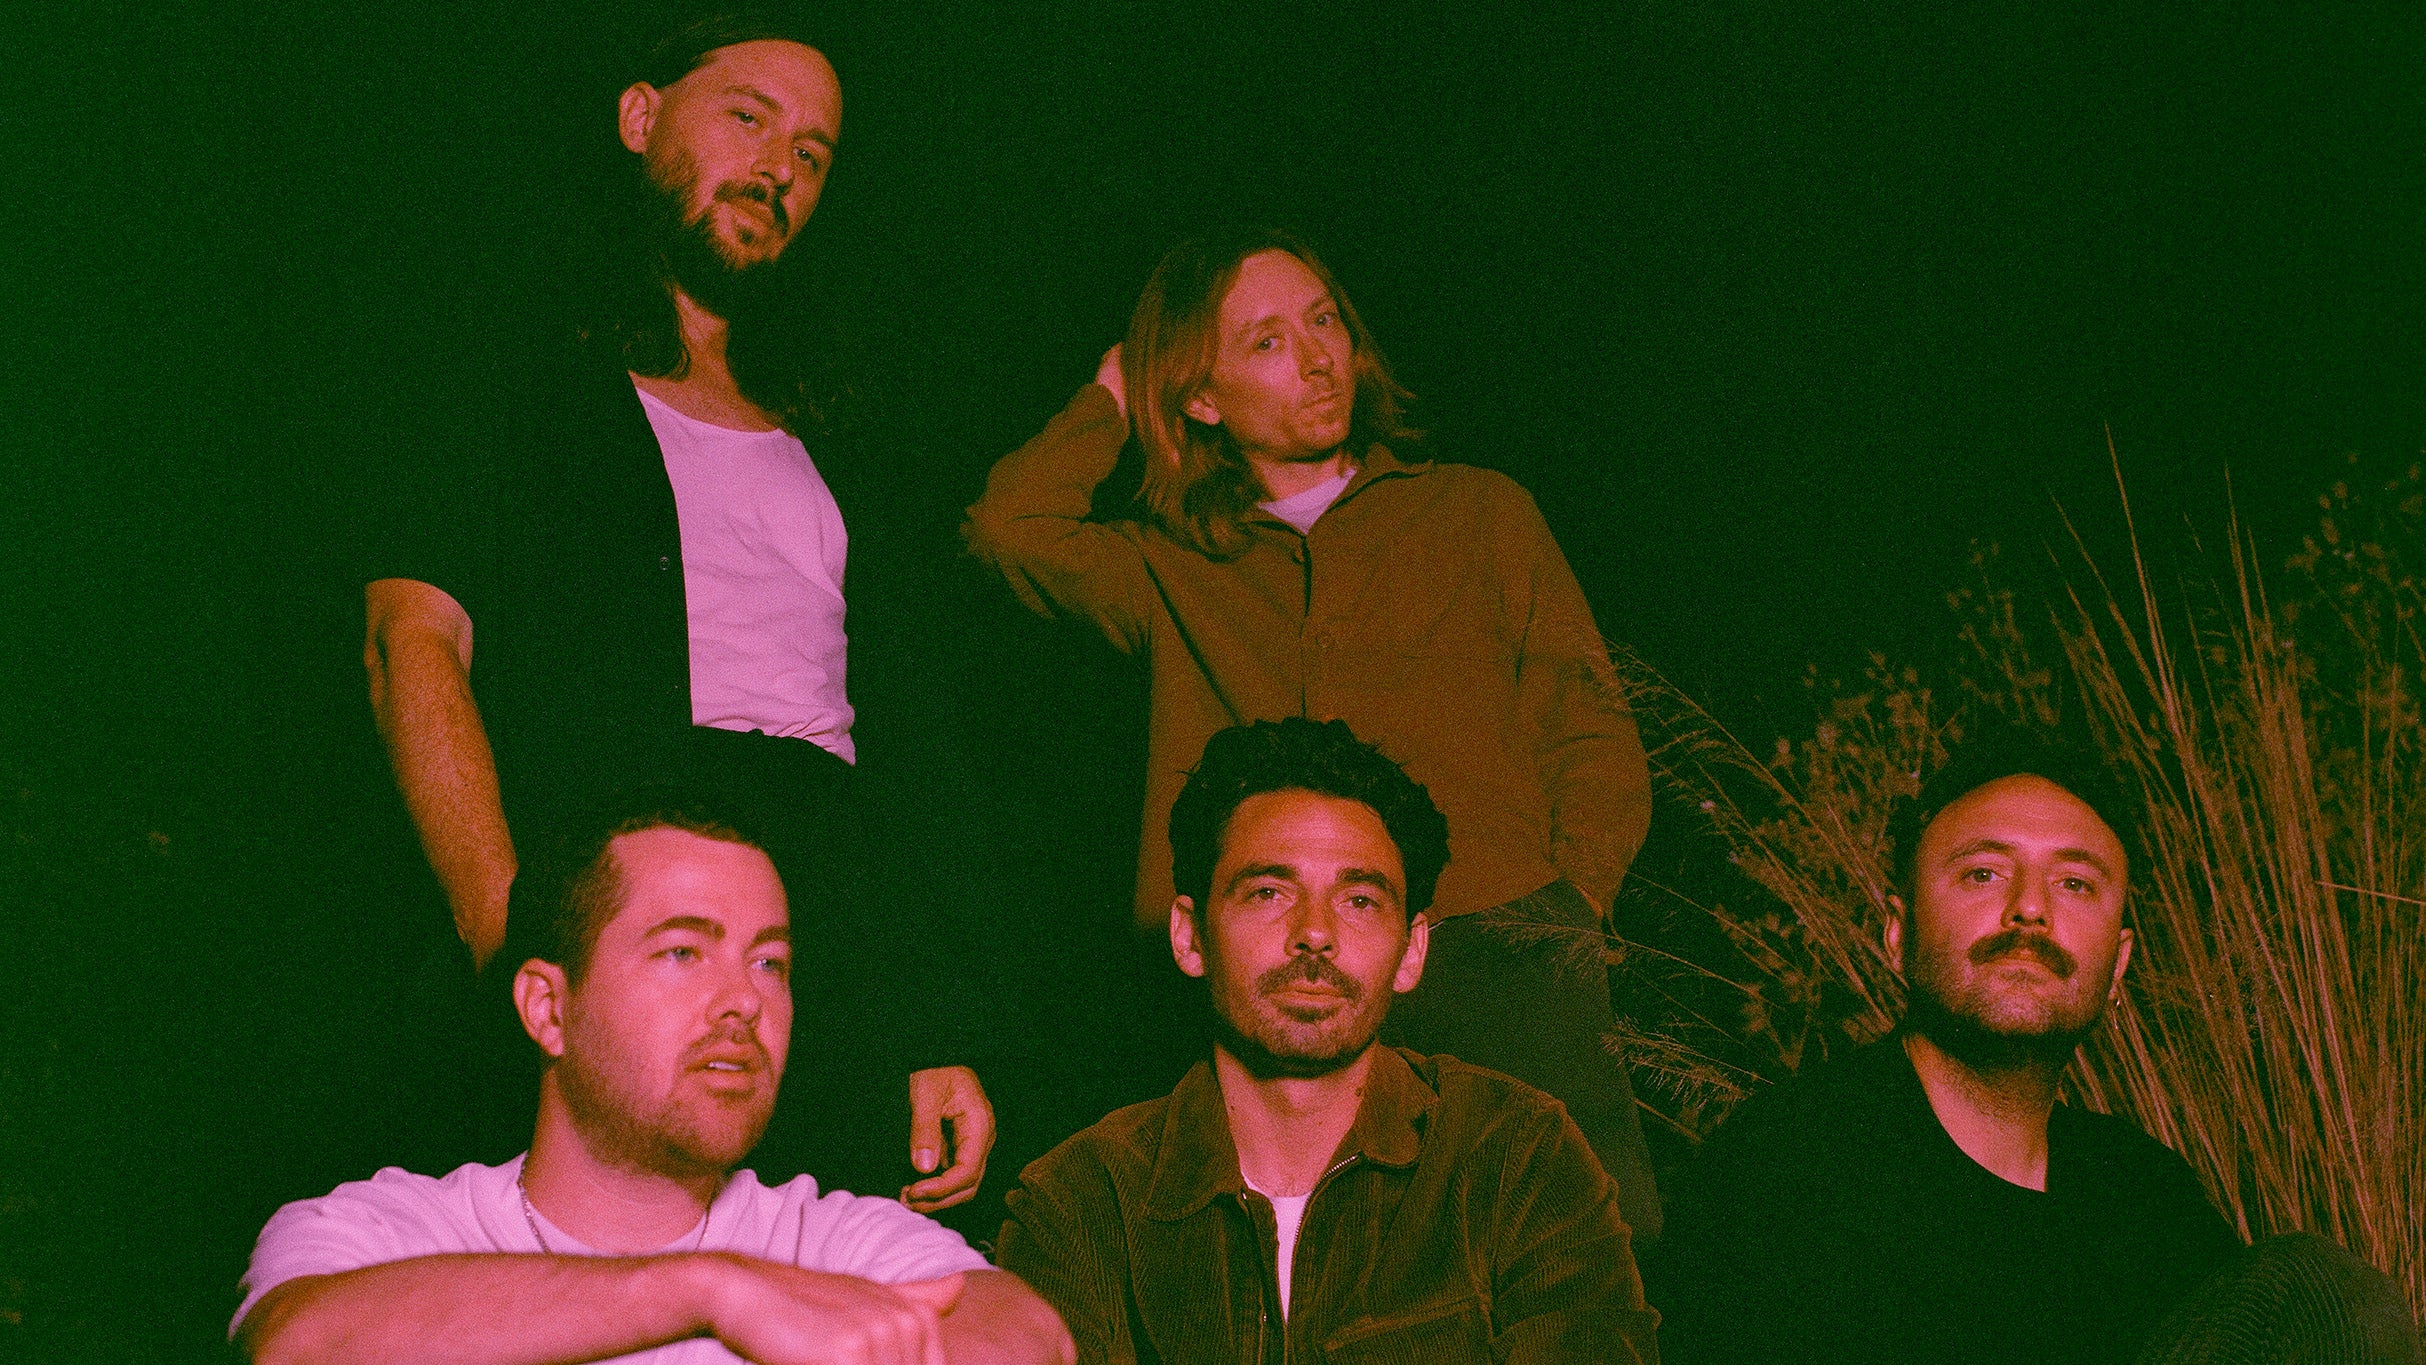 presale c0de for Local Natives - Time Will Wait For No One Tour tickets in New York - NY (The Rooftop at Pier 17)